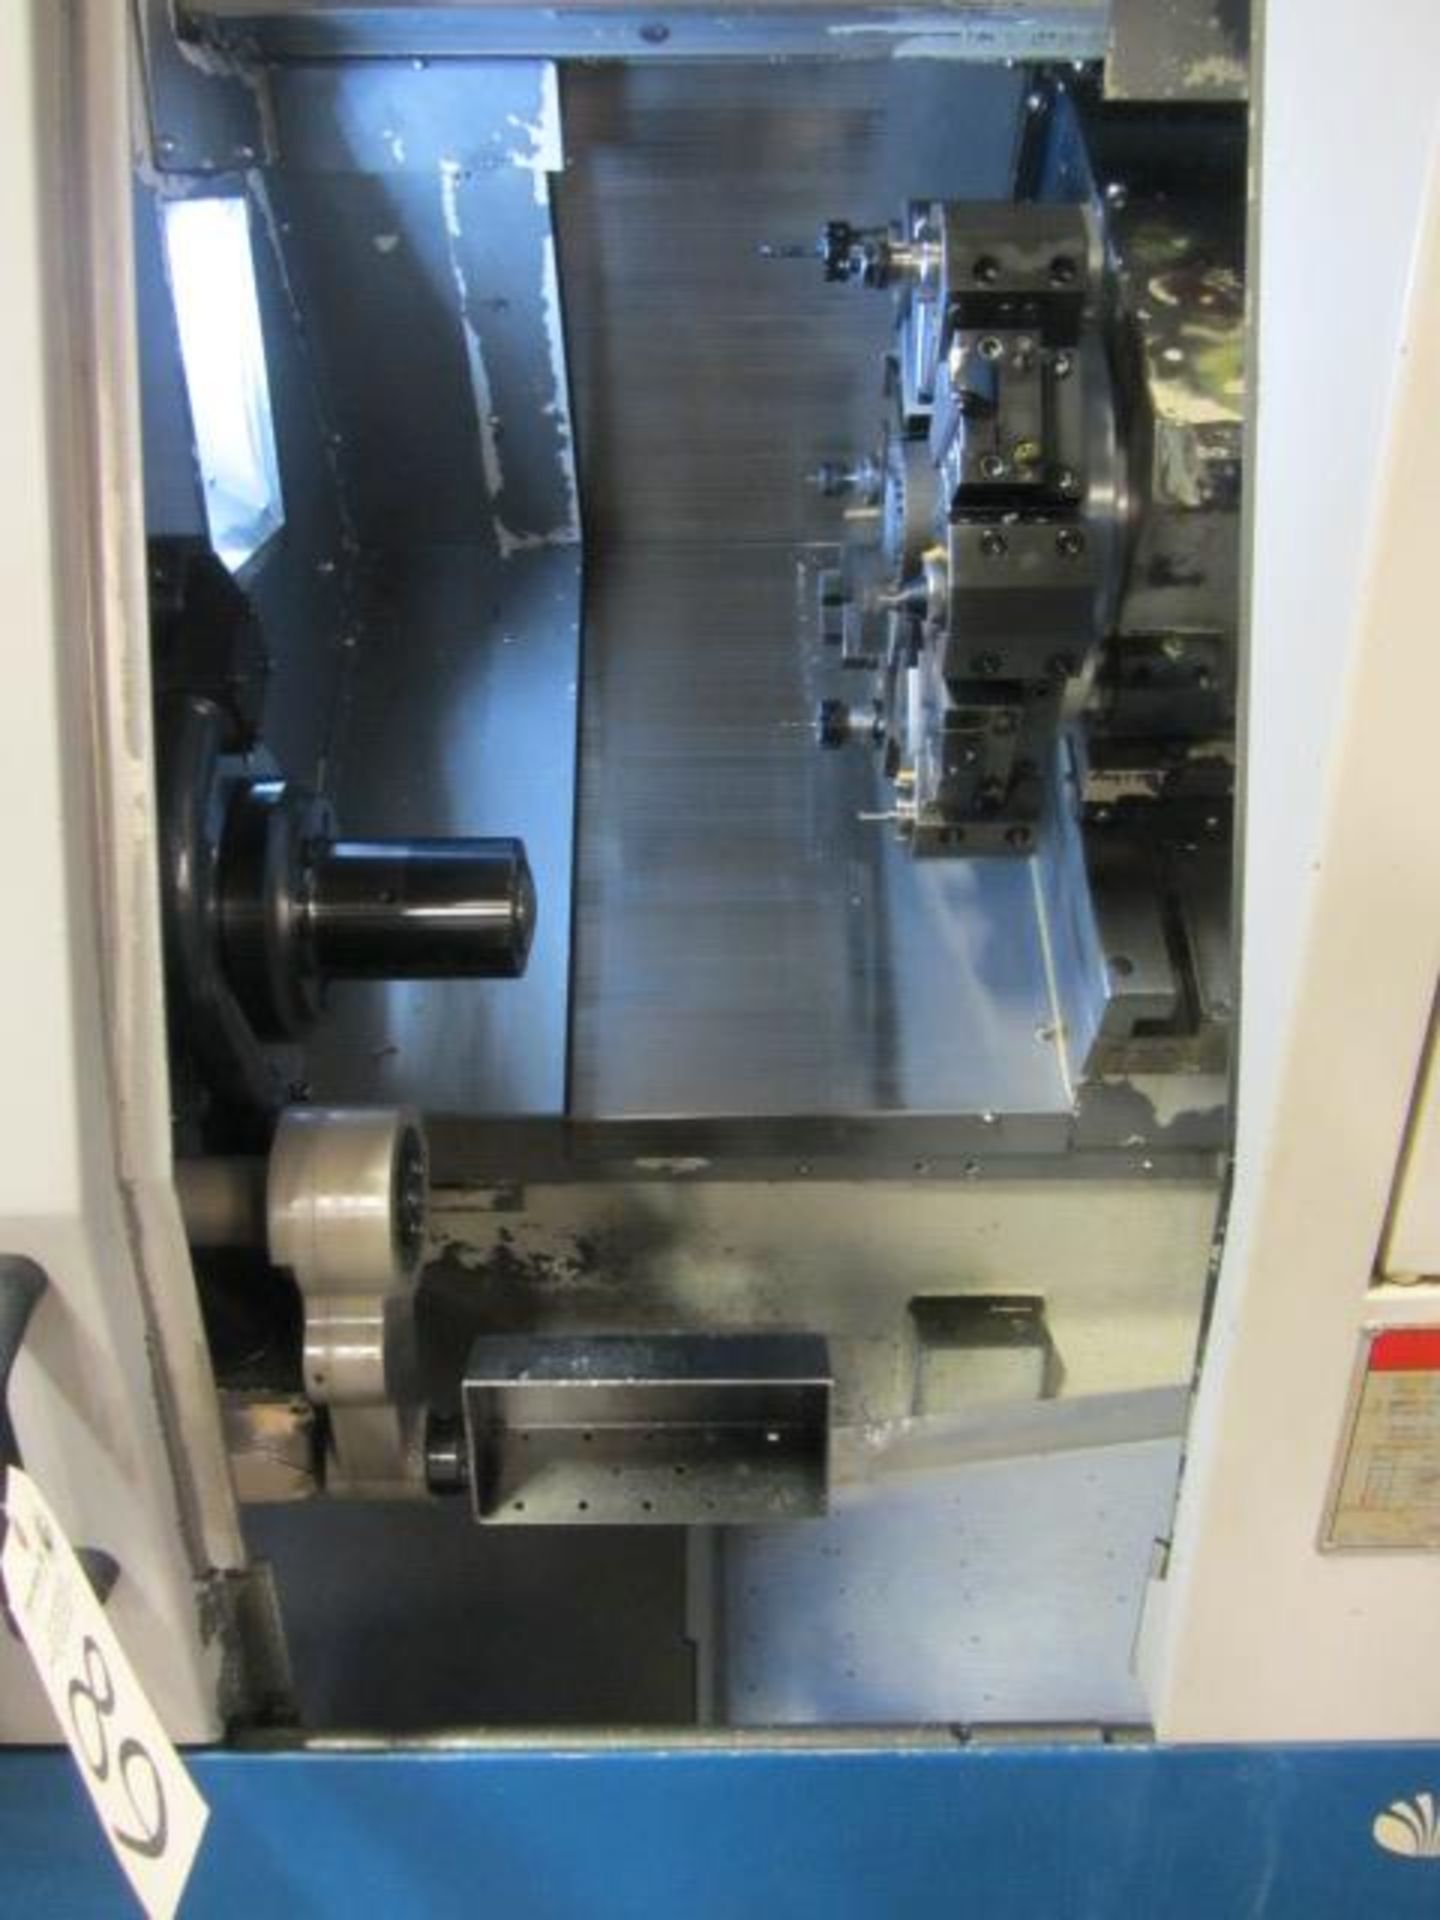 Daewoo Lynx 210A CNC Turning Center with 16C Collet Chuck, Parts Catcher, Fanuc i CNC Control, sn: - Image 3 of 7